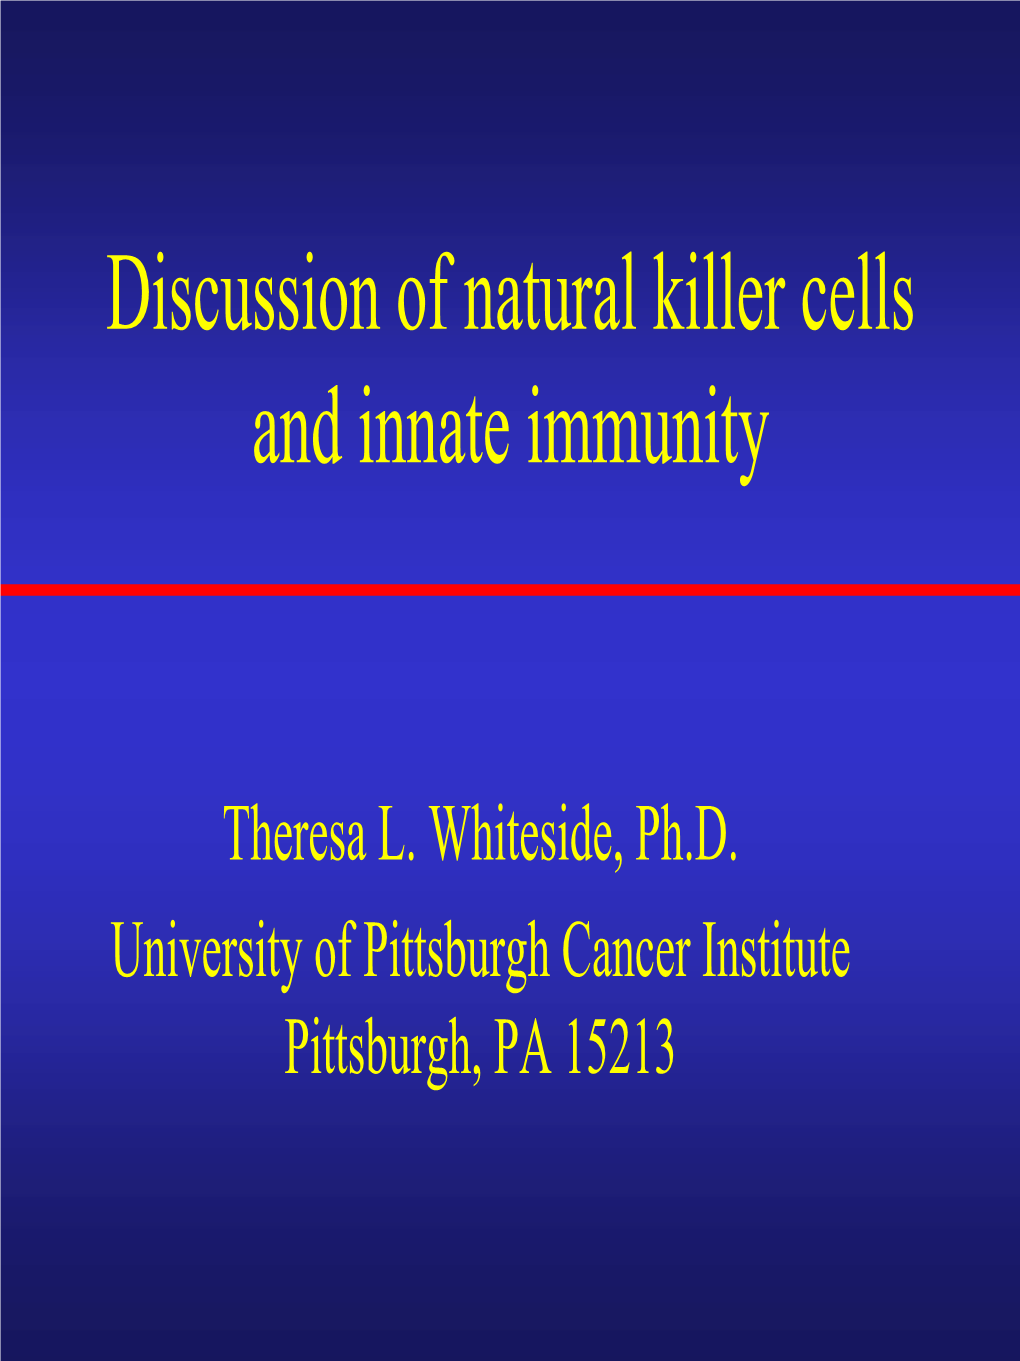 Discussion of Natural Killer Cells and Innate Immunity